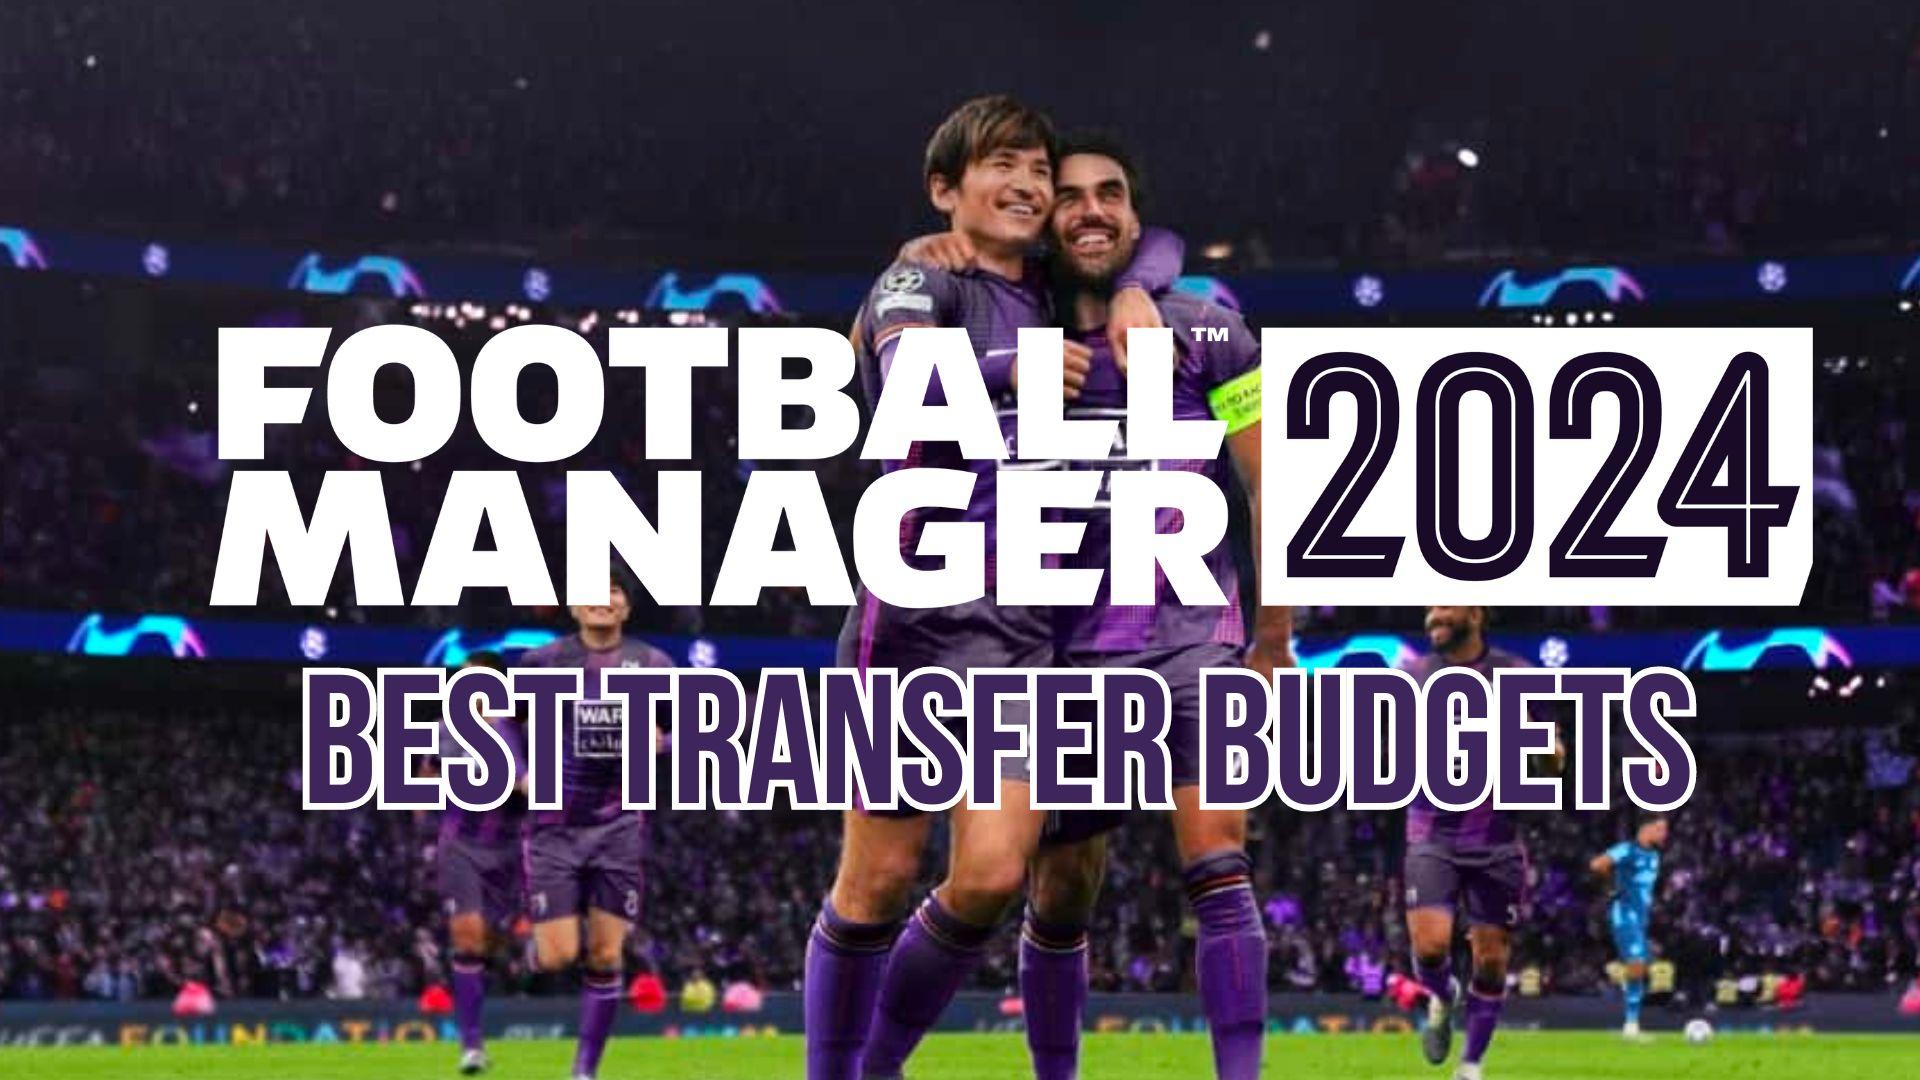 The best free agents to sign in Football Manager 2024